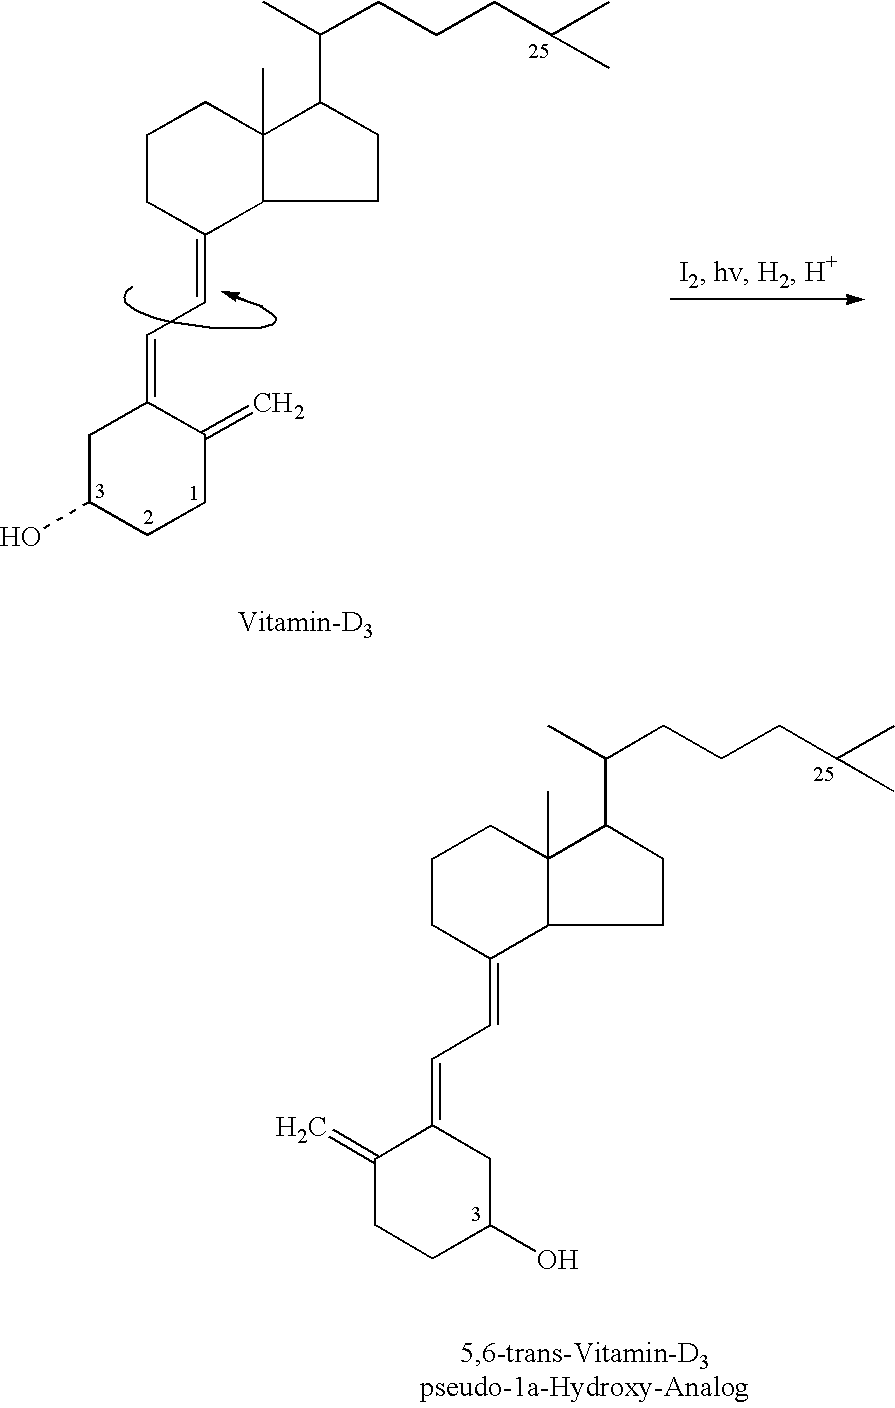 Functional vitamin D derivatives and a method for determining 25-hydroxy-vitamin D and 1alpha, dihydroxy-vitamin D